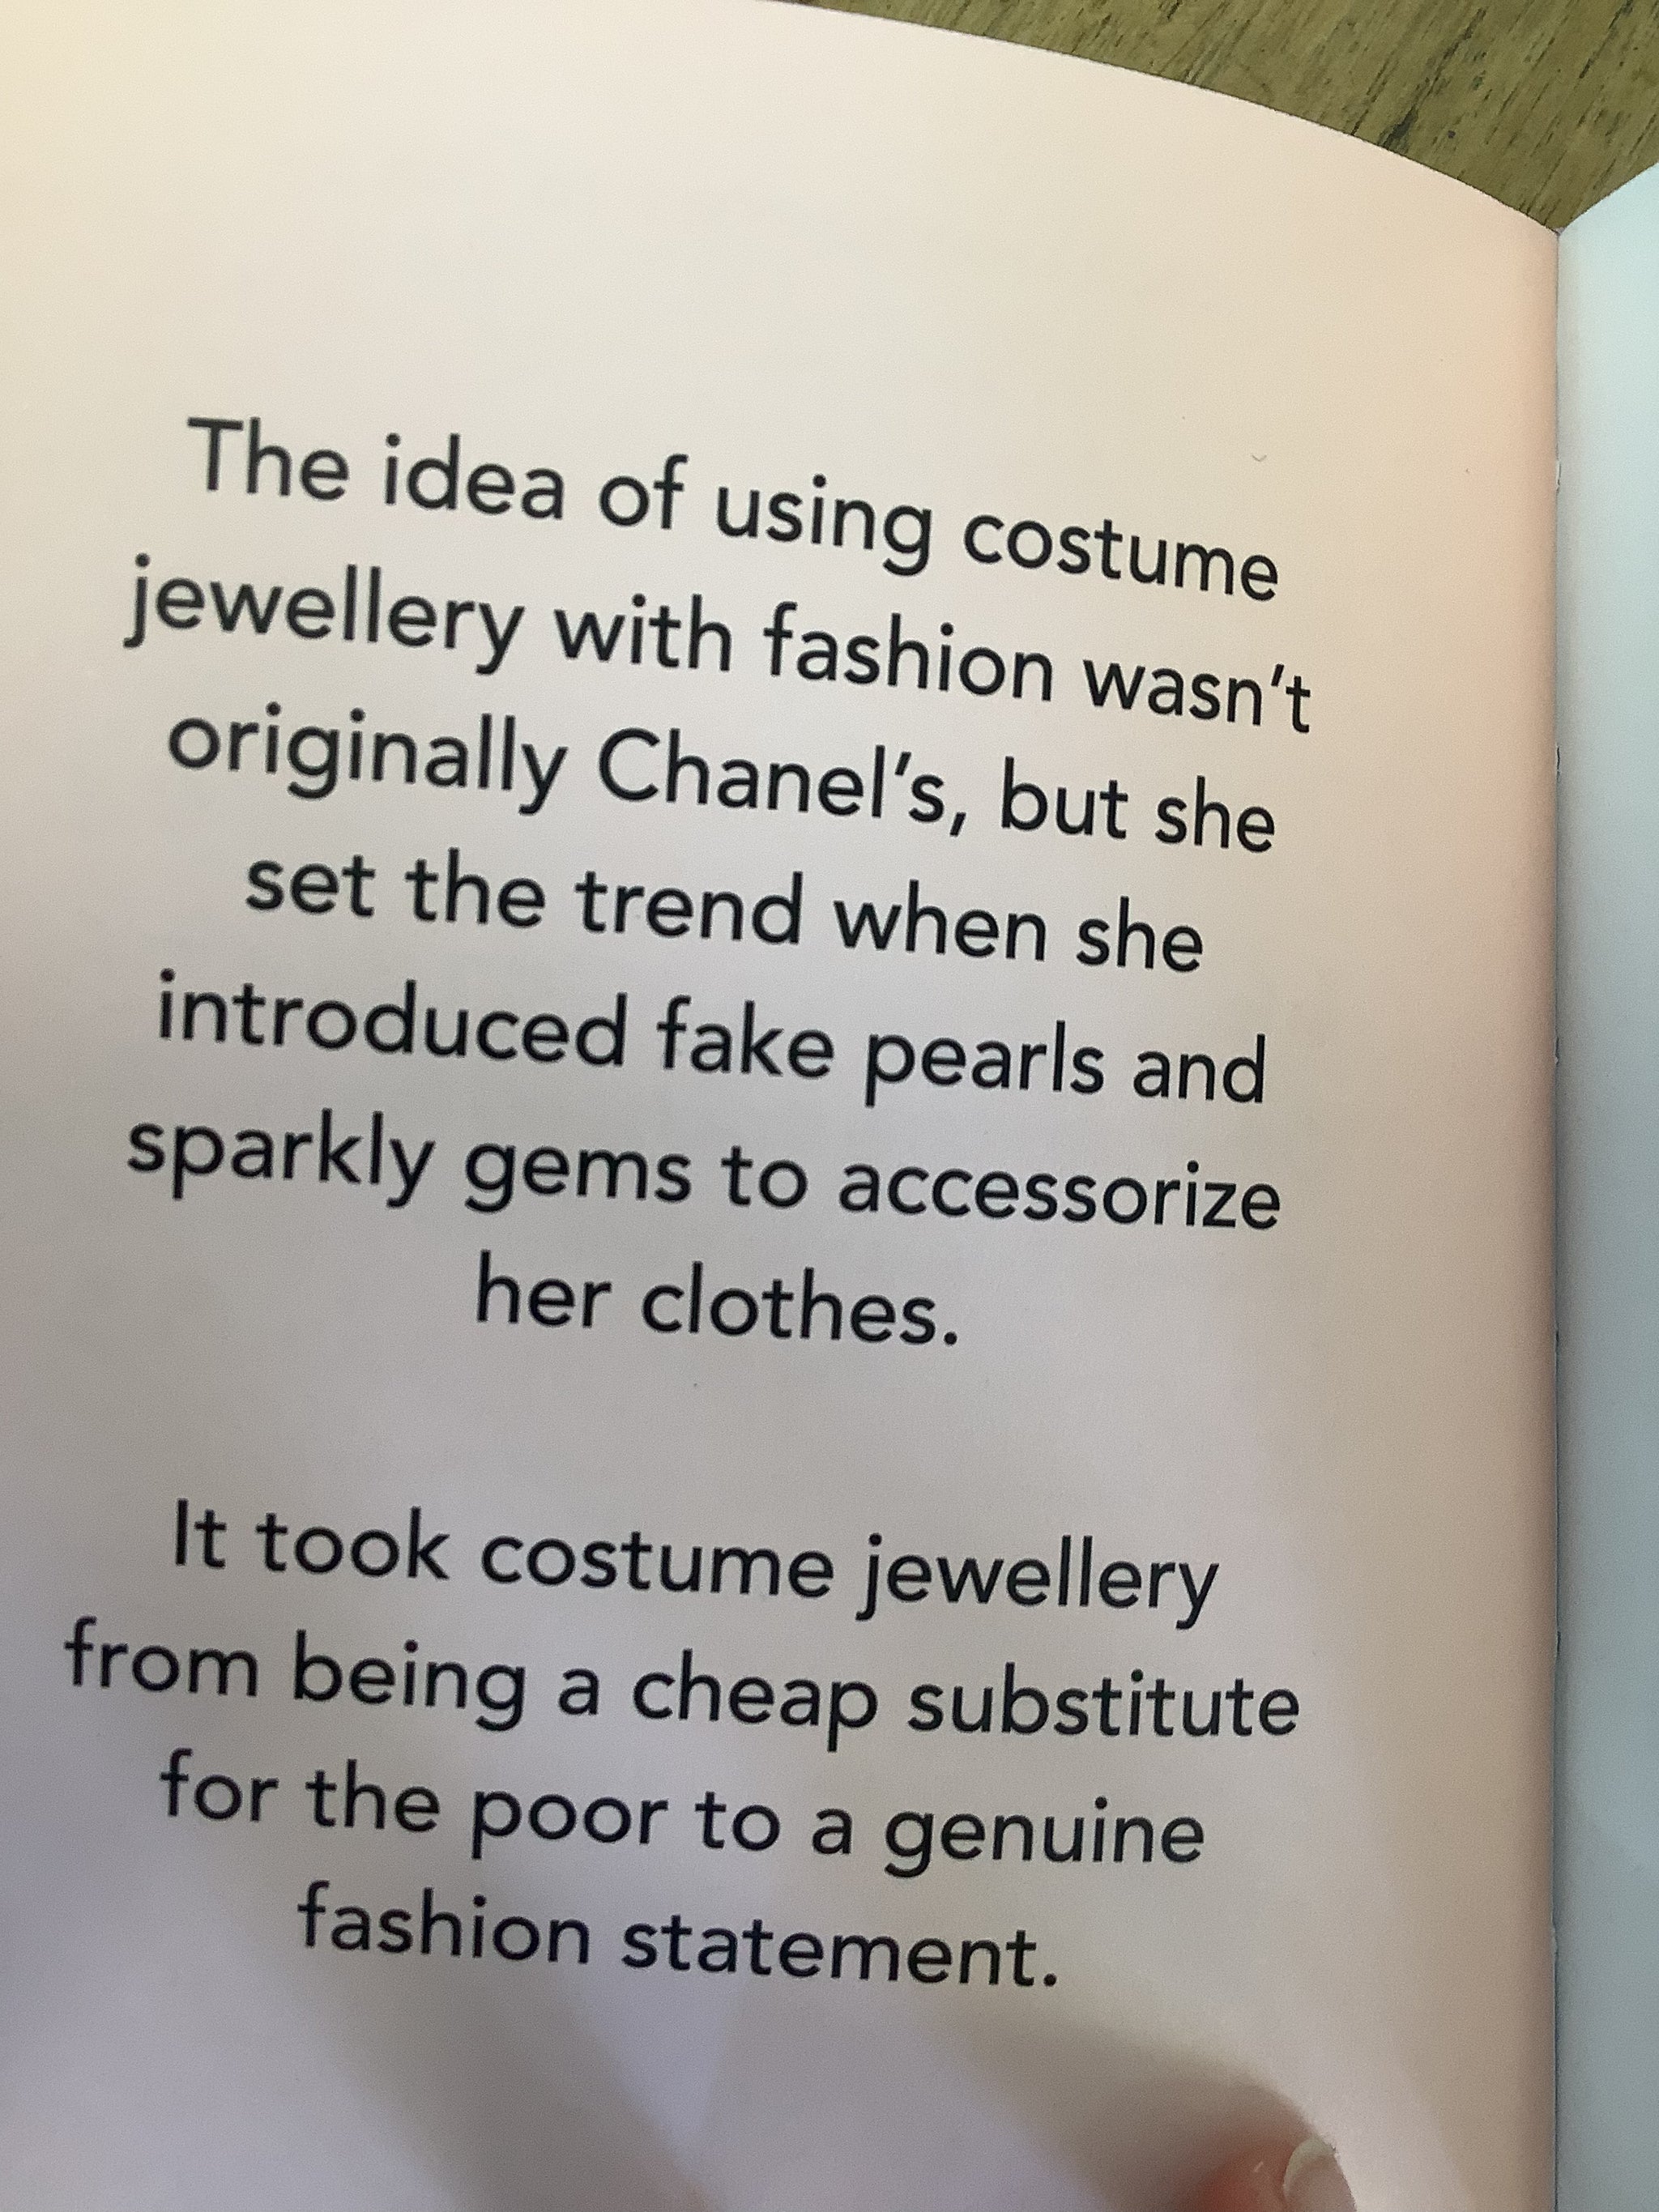 New Mags - The Little Guide to Coco Chanel - INTERIOR